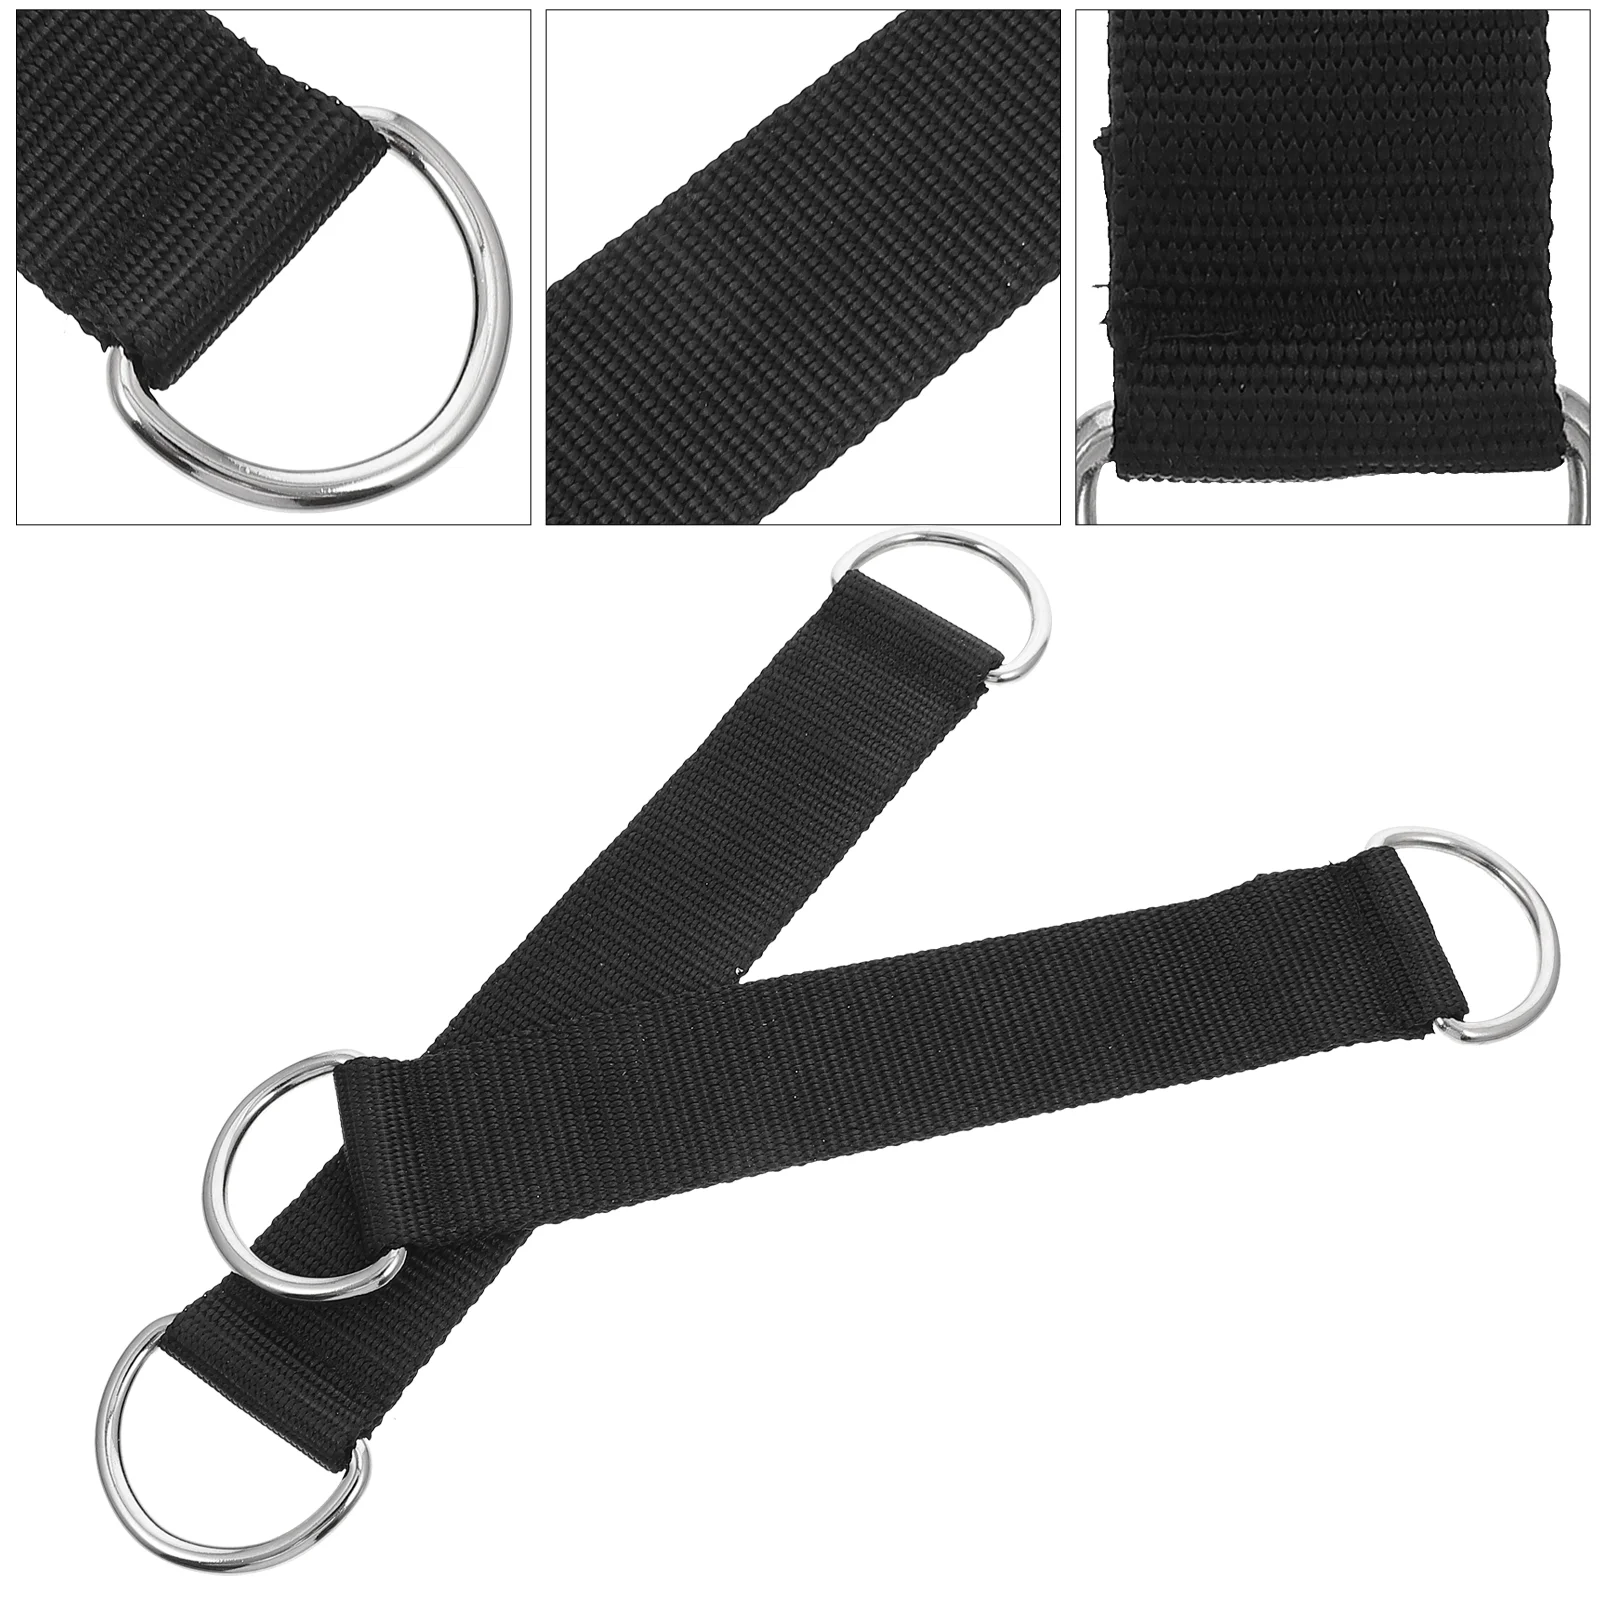 

2 Pcs Pulley Straps Sports Tool Fitness Hanger Suspend Accessories Hanging Swing Hangers Supplies Suspenders Supply Rope